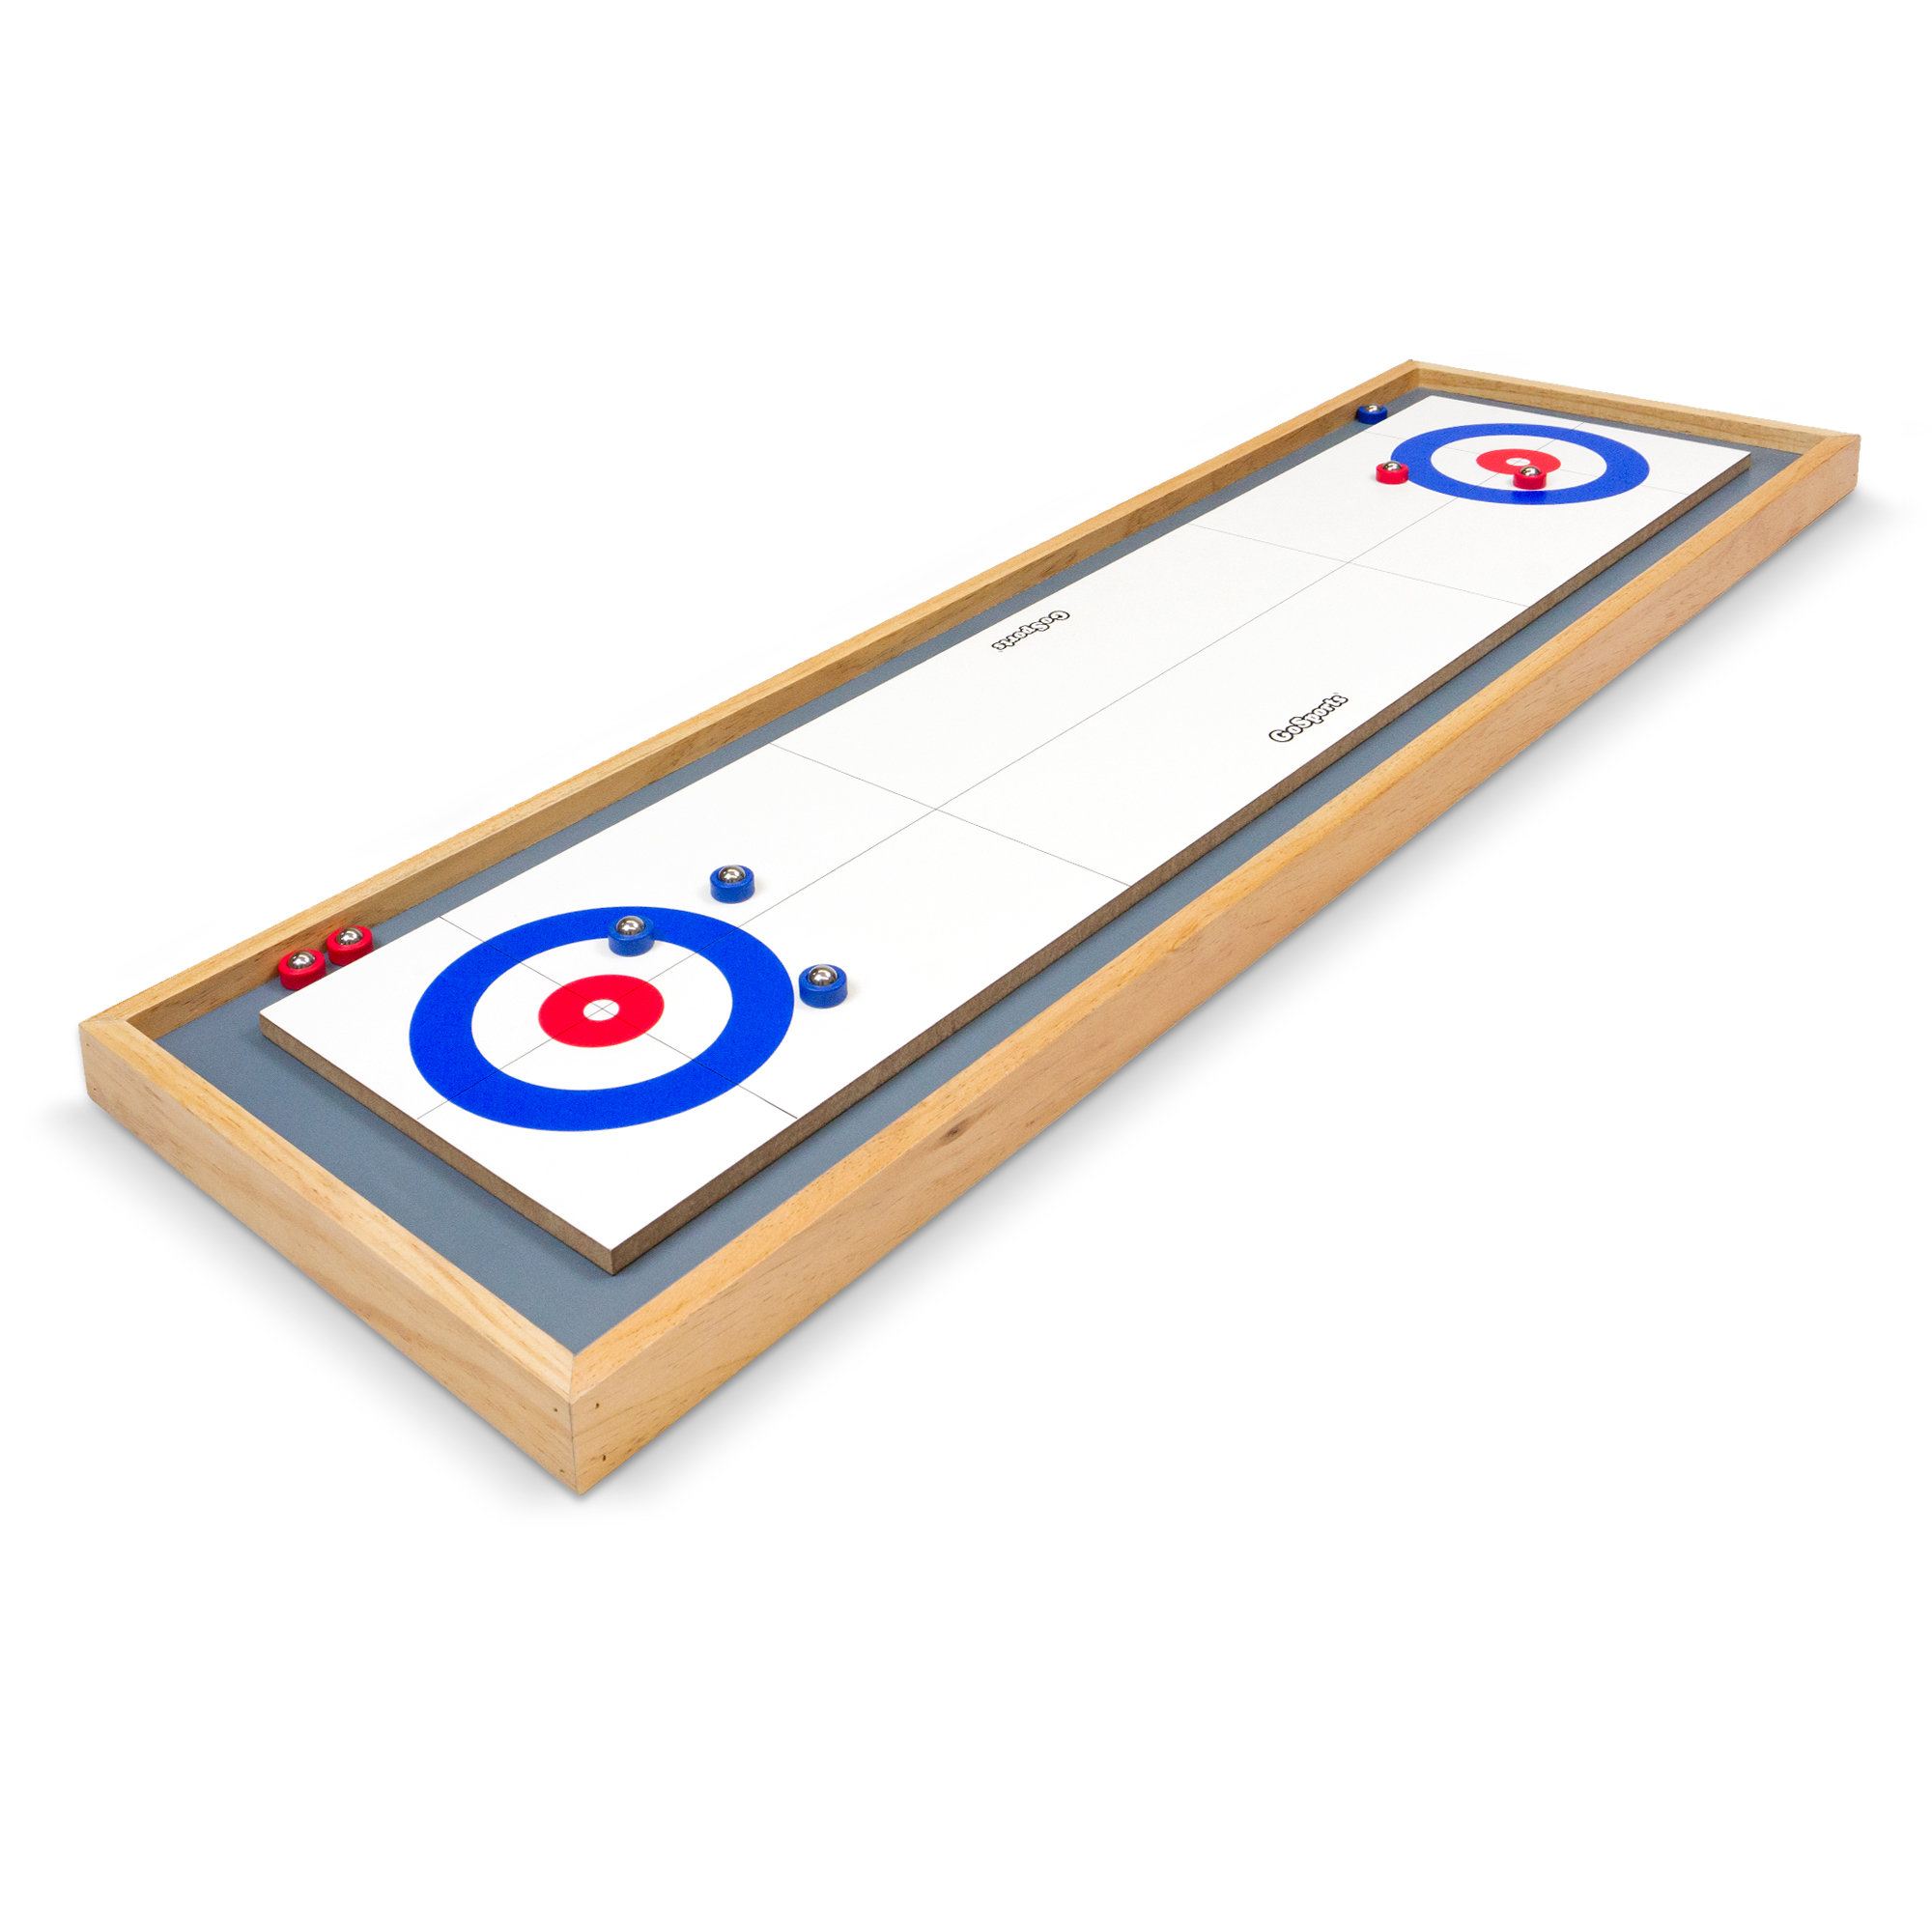 GoSports Shuffleboard and Curling 2 in 1 Board Game & Reviews